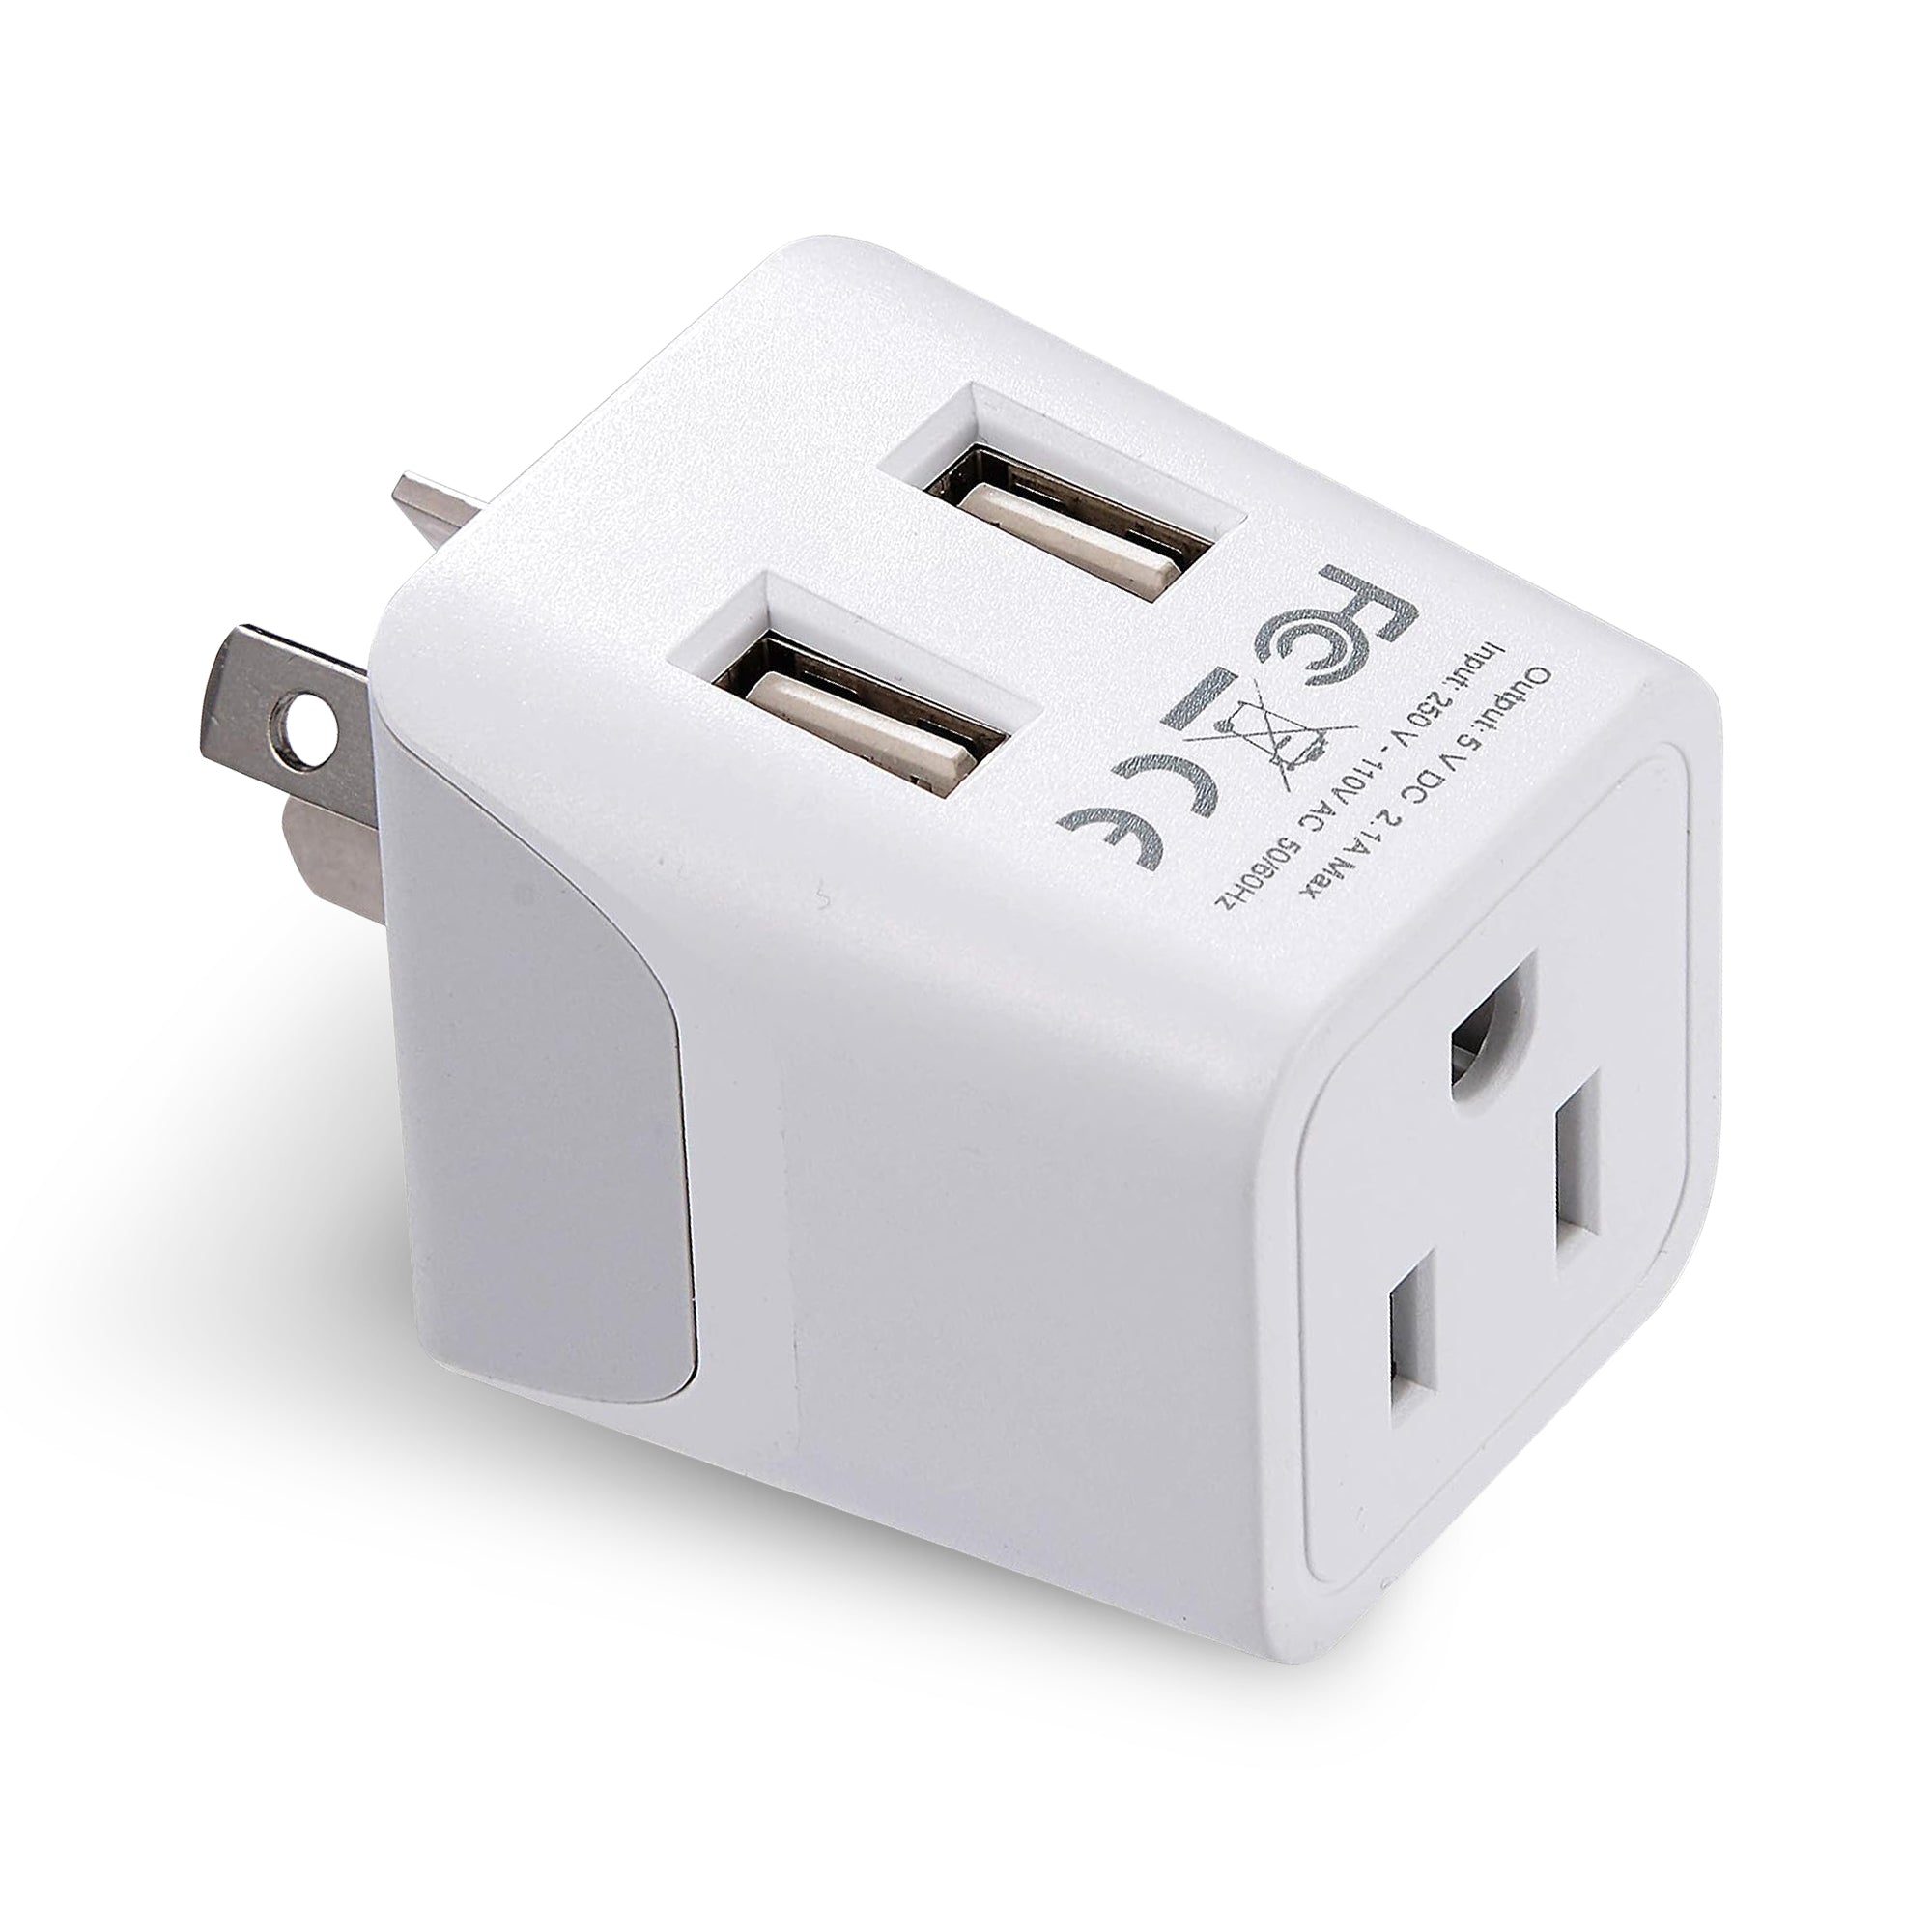 Universal Travel Adapter Plug Compact Safe Grounded Perfect for Cell Phones  Laptops Camera EU UK US AU